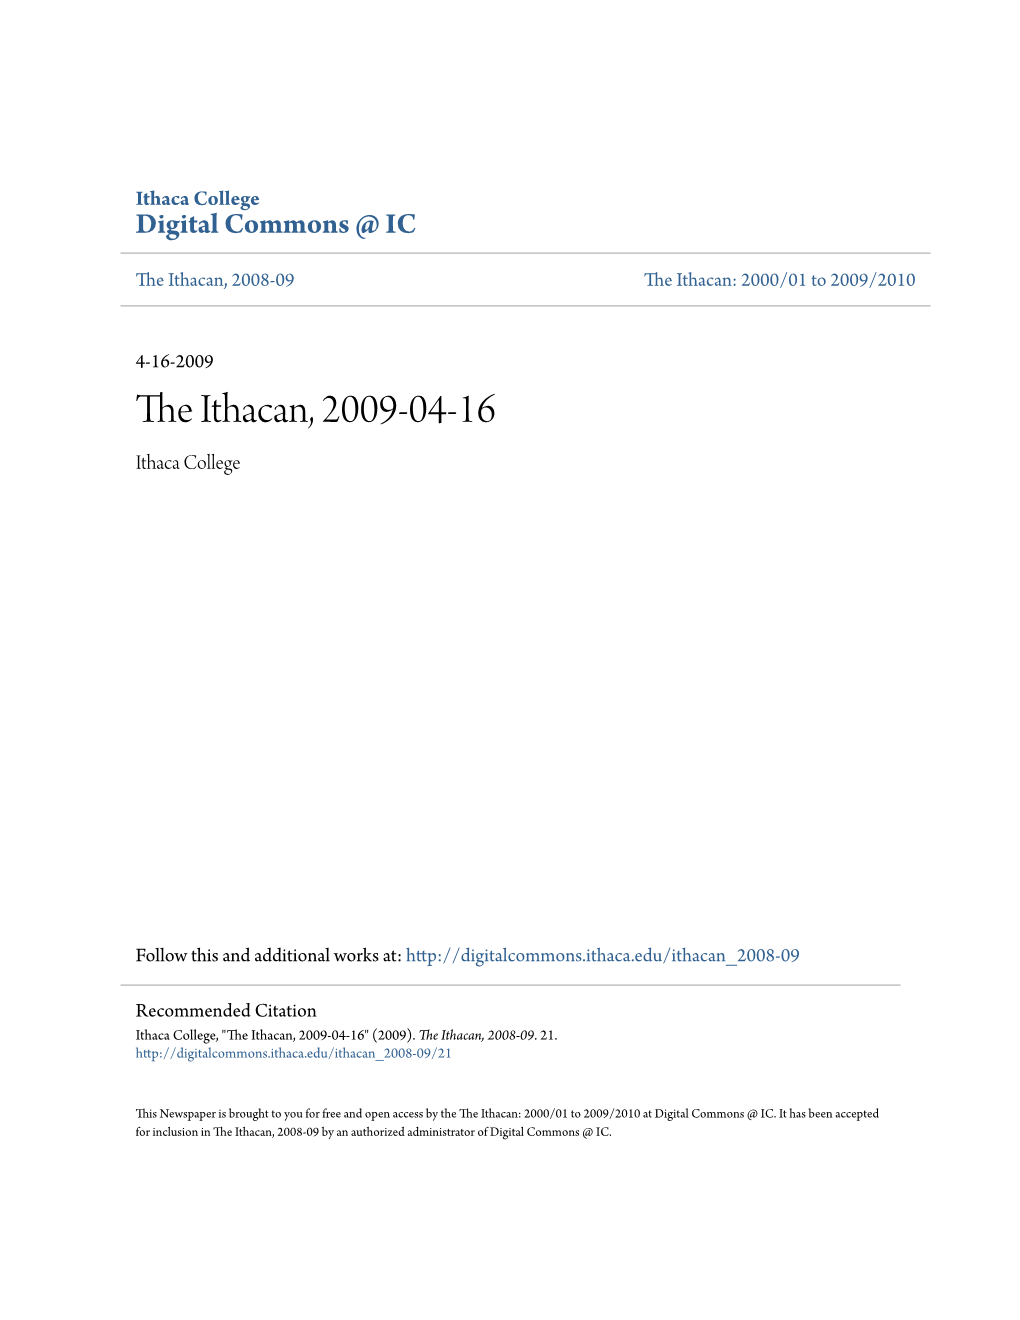 The Ithacan, 2009-04-16